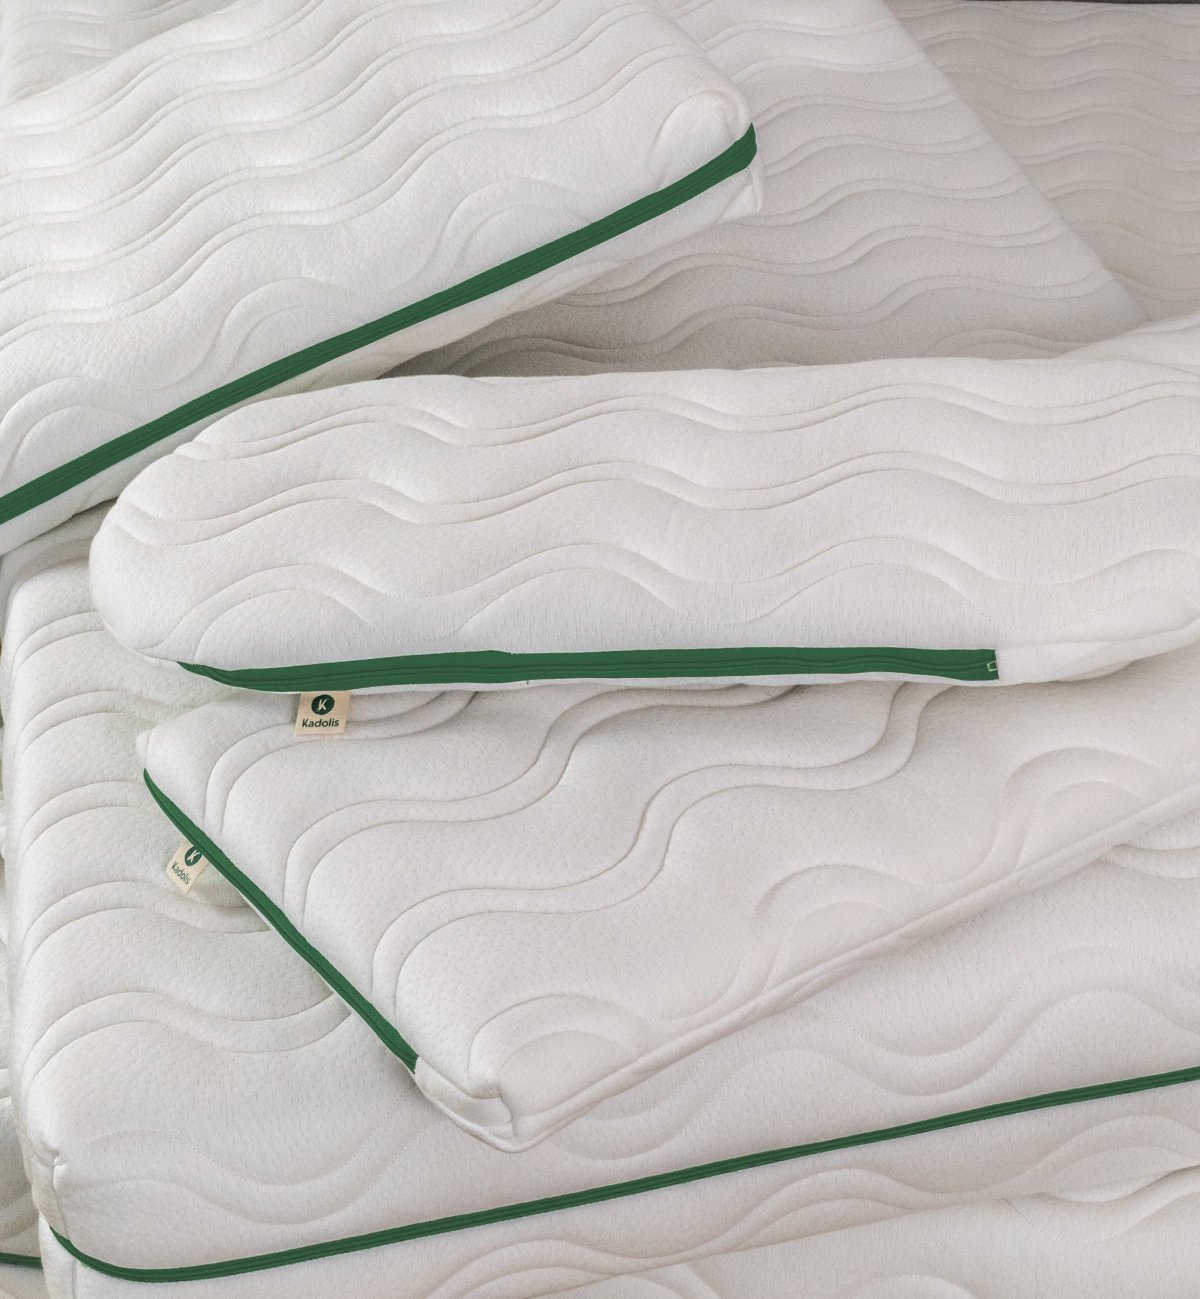 Aloe R adult mattress in recycled polyester fabric, available in 4 2-person sizes and made-to-measure